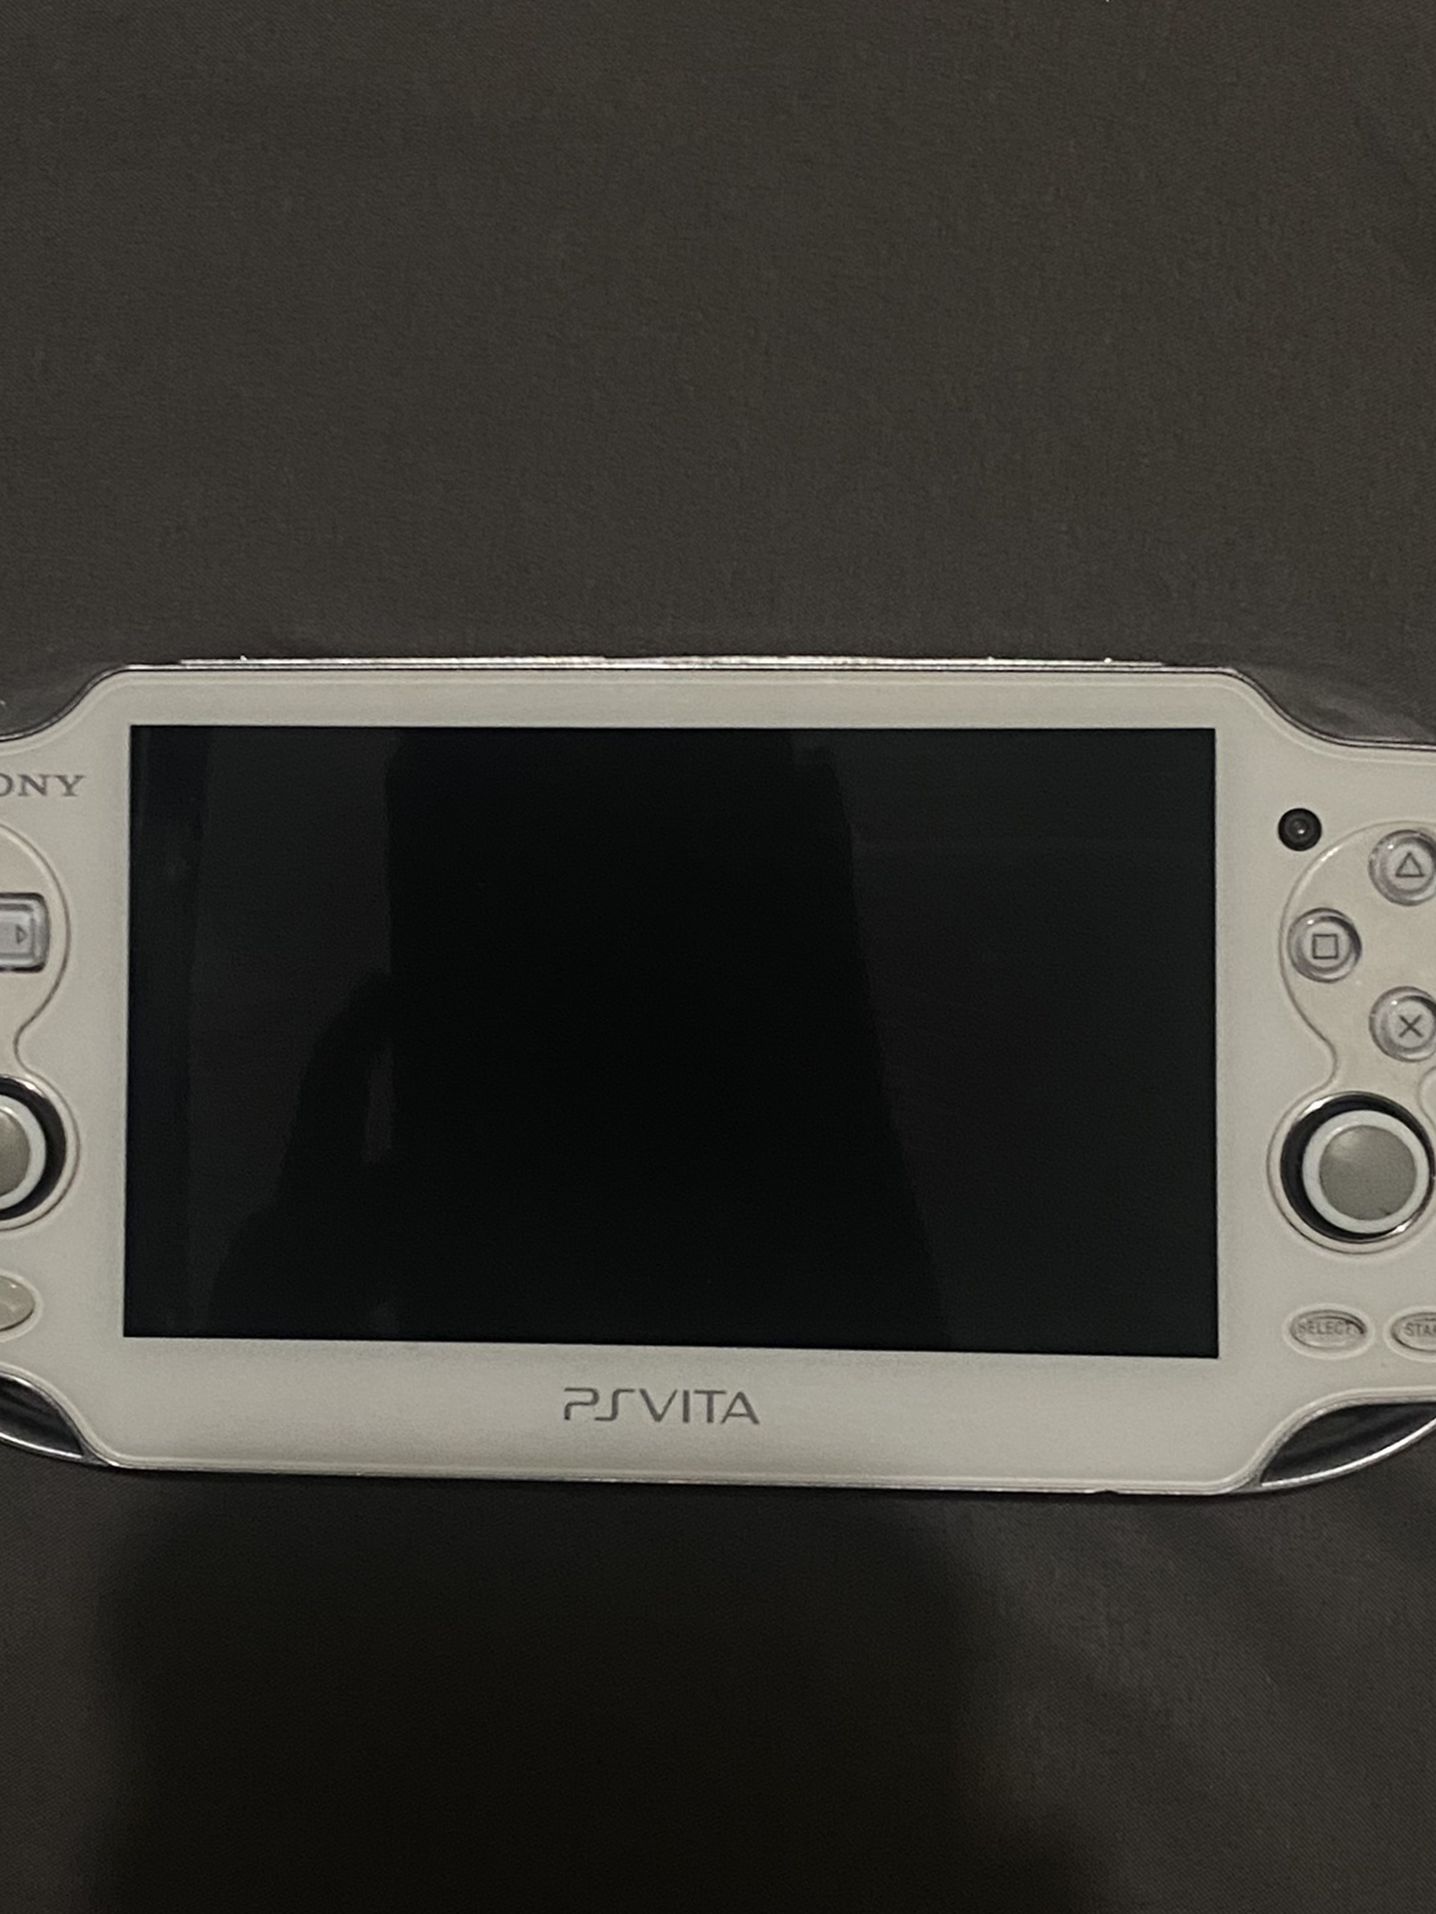 Sony PlayStation Vita PHC- 1000 Crystal White / 4 GB memory Card Included